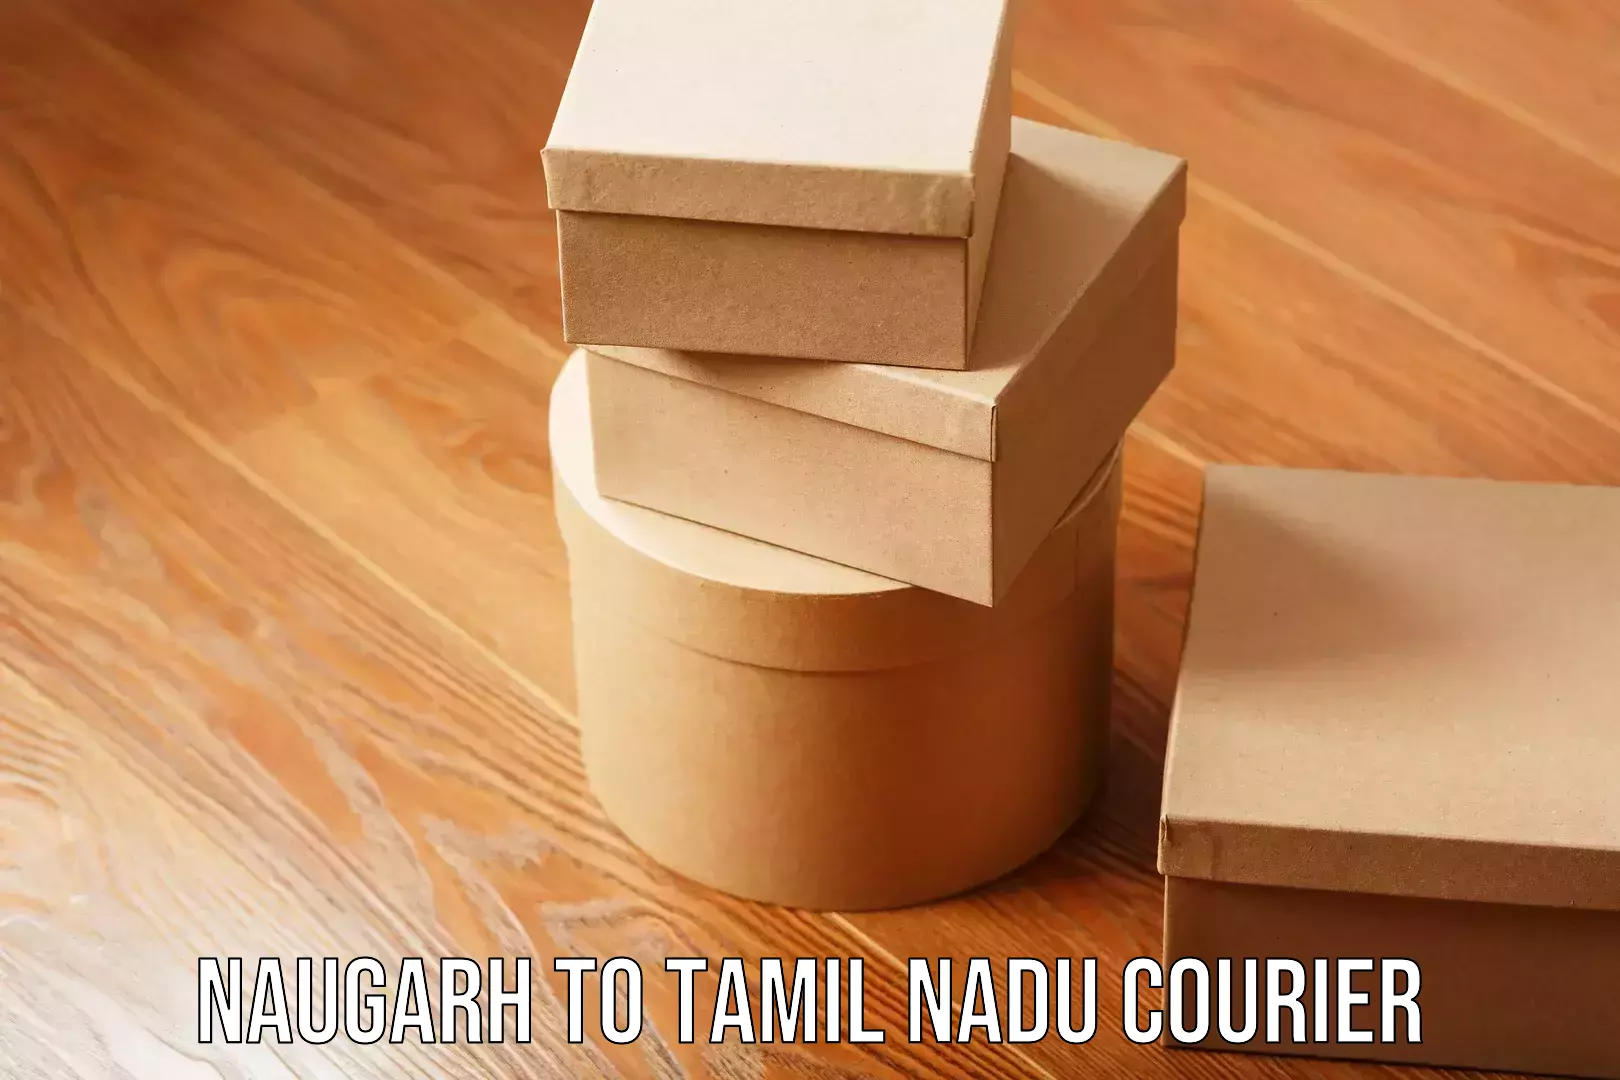 Hassle-free relocation in Naugarh to Tamil Nadu